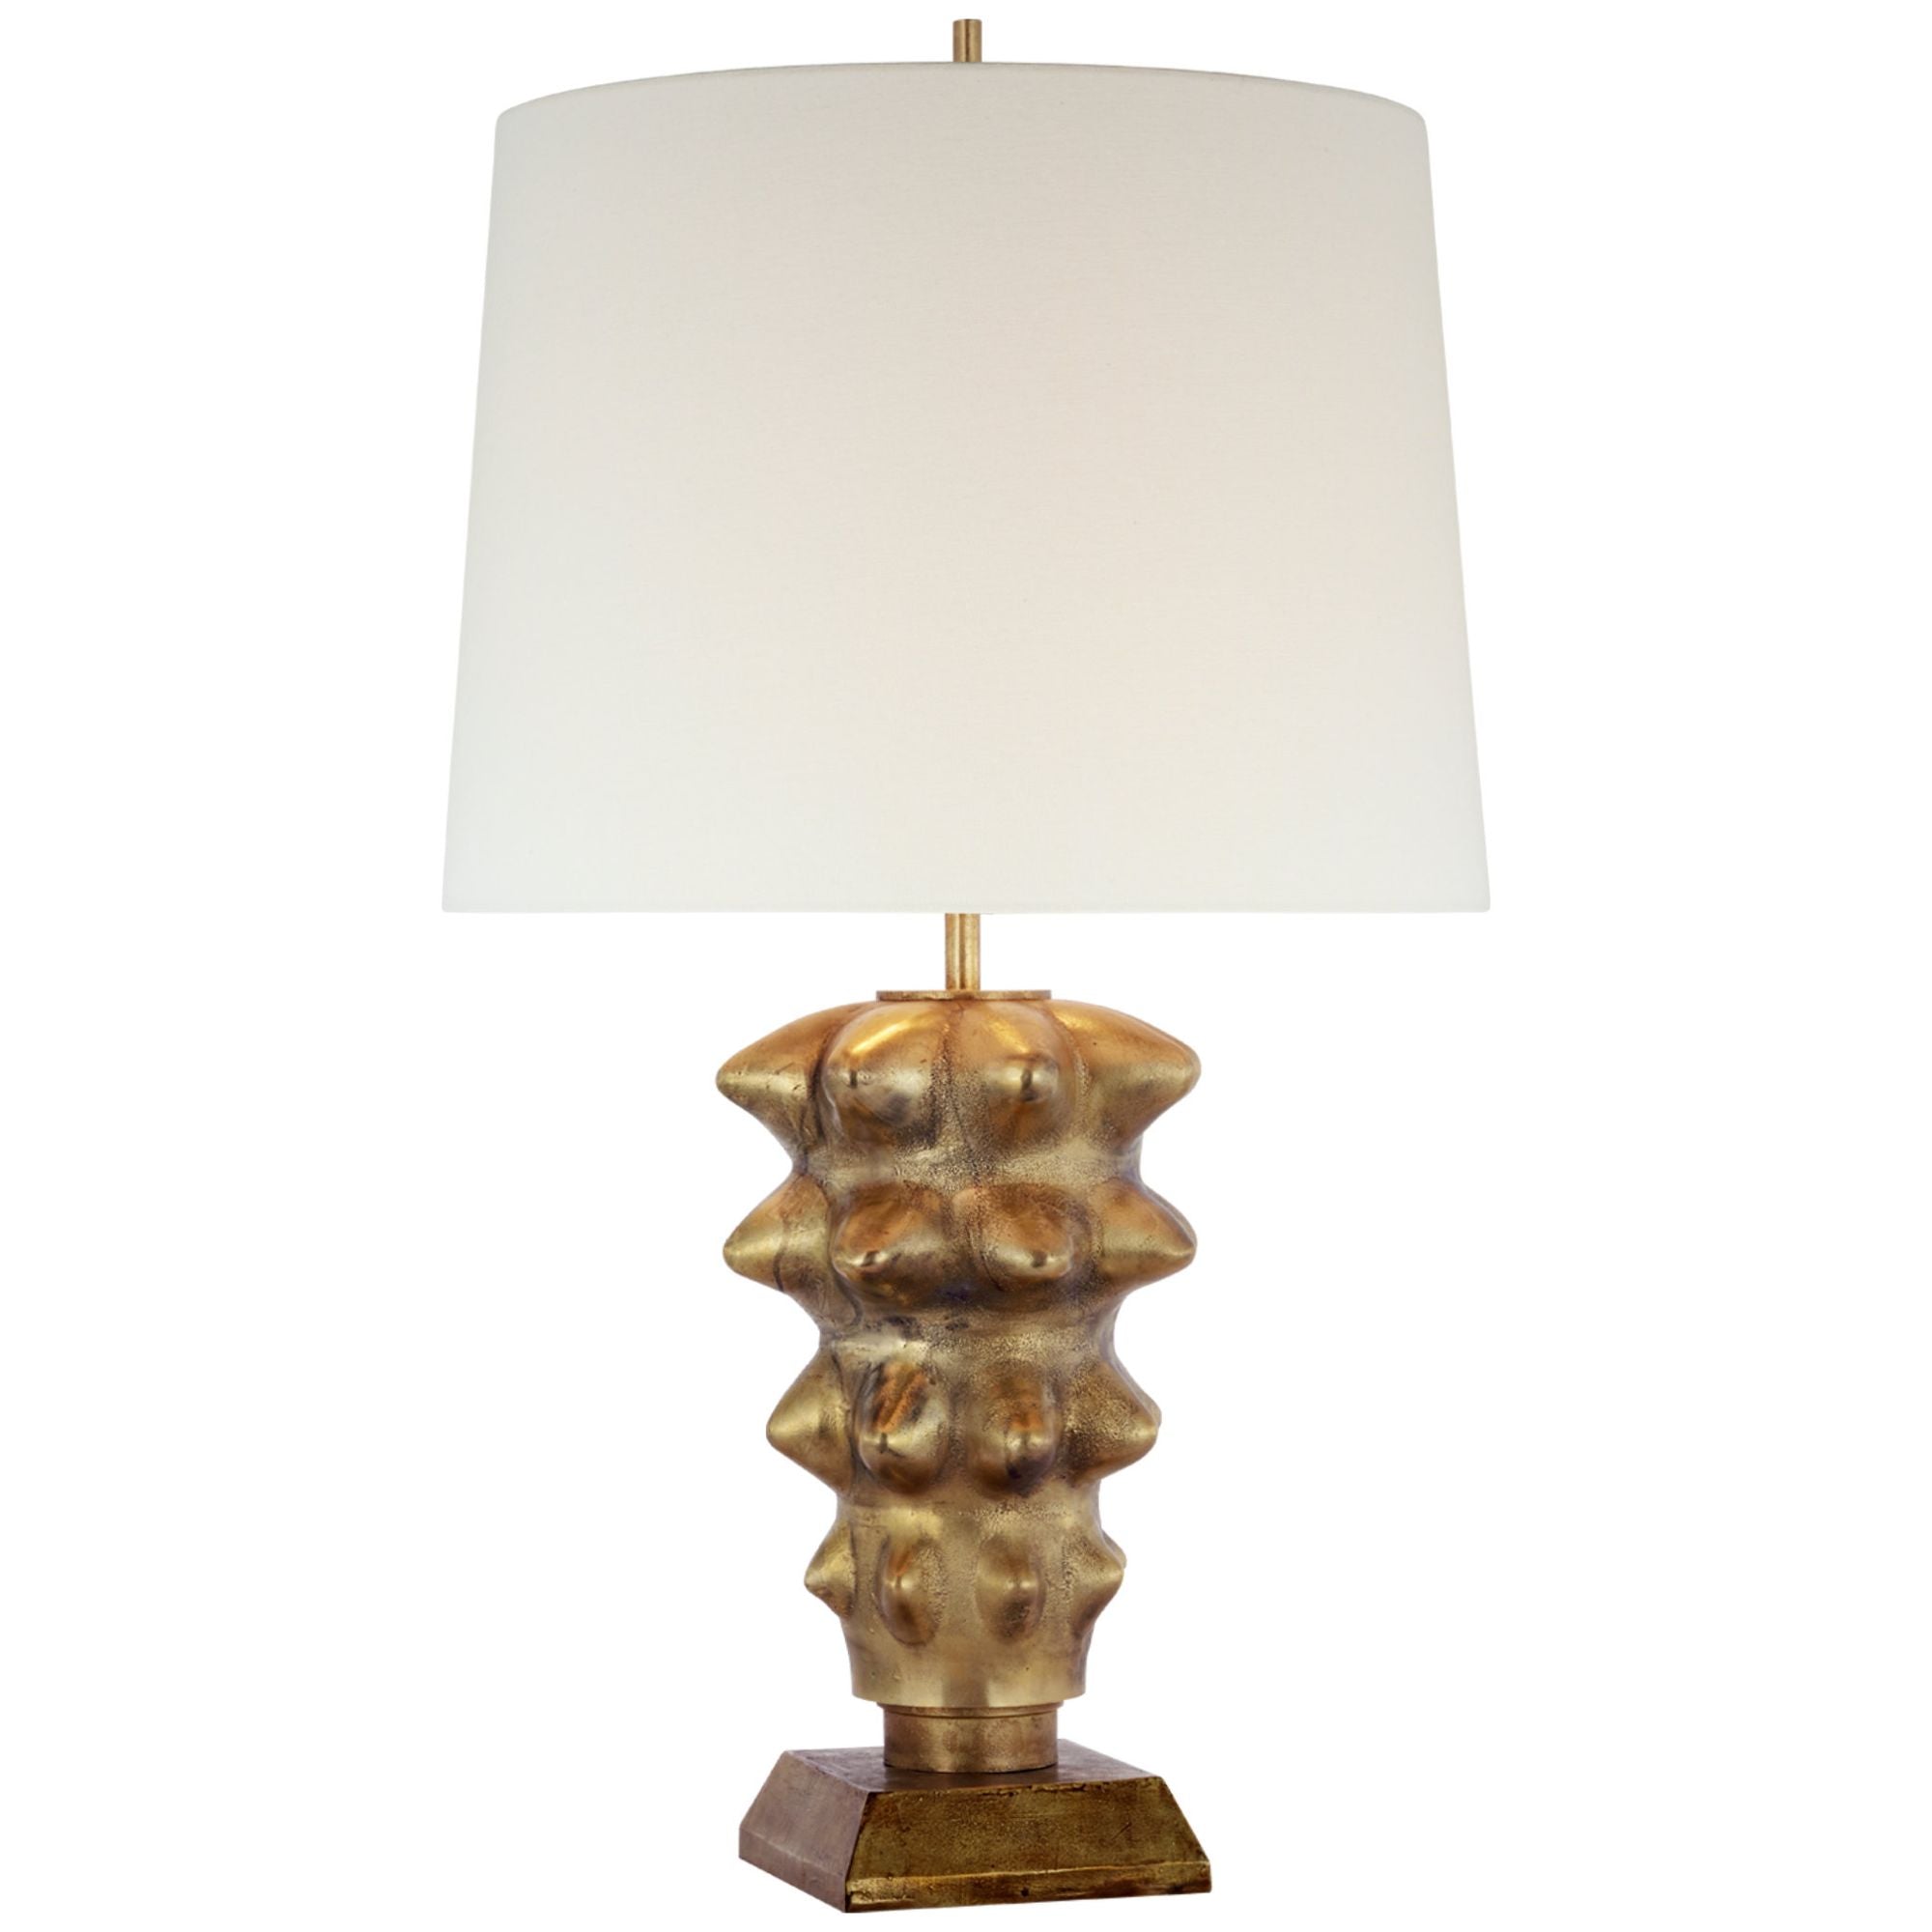 Thomas O'Brien Luxor Large Table Lamp in Museum Brass with Linen Shade